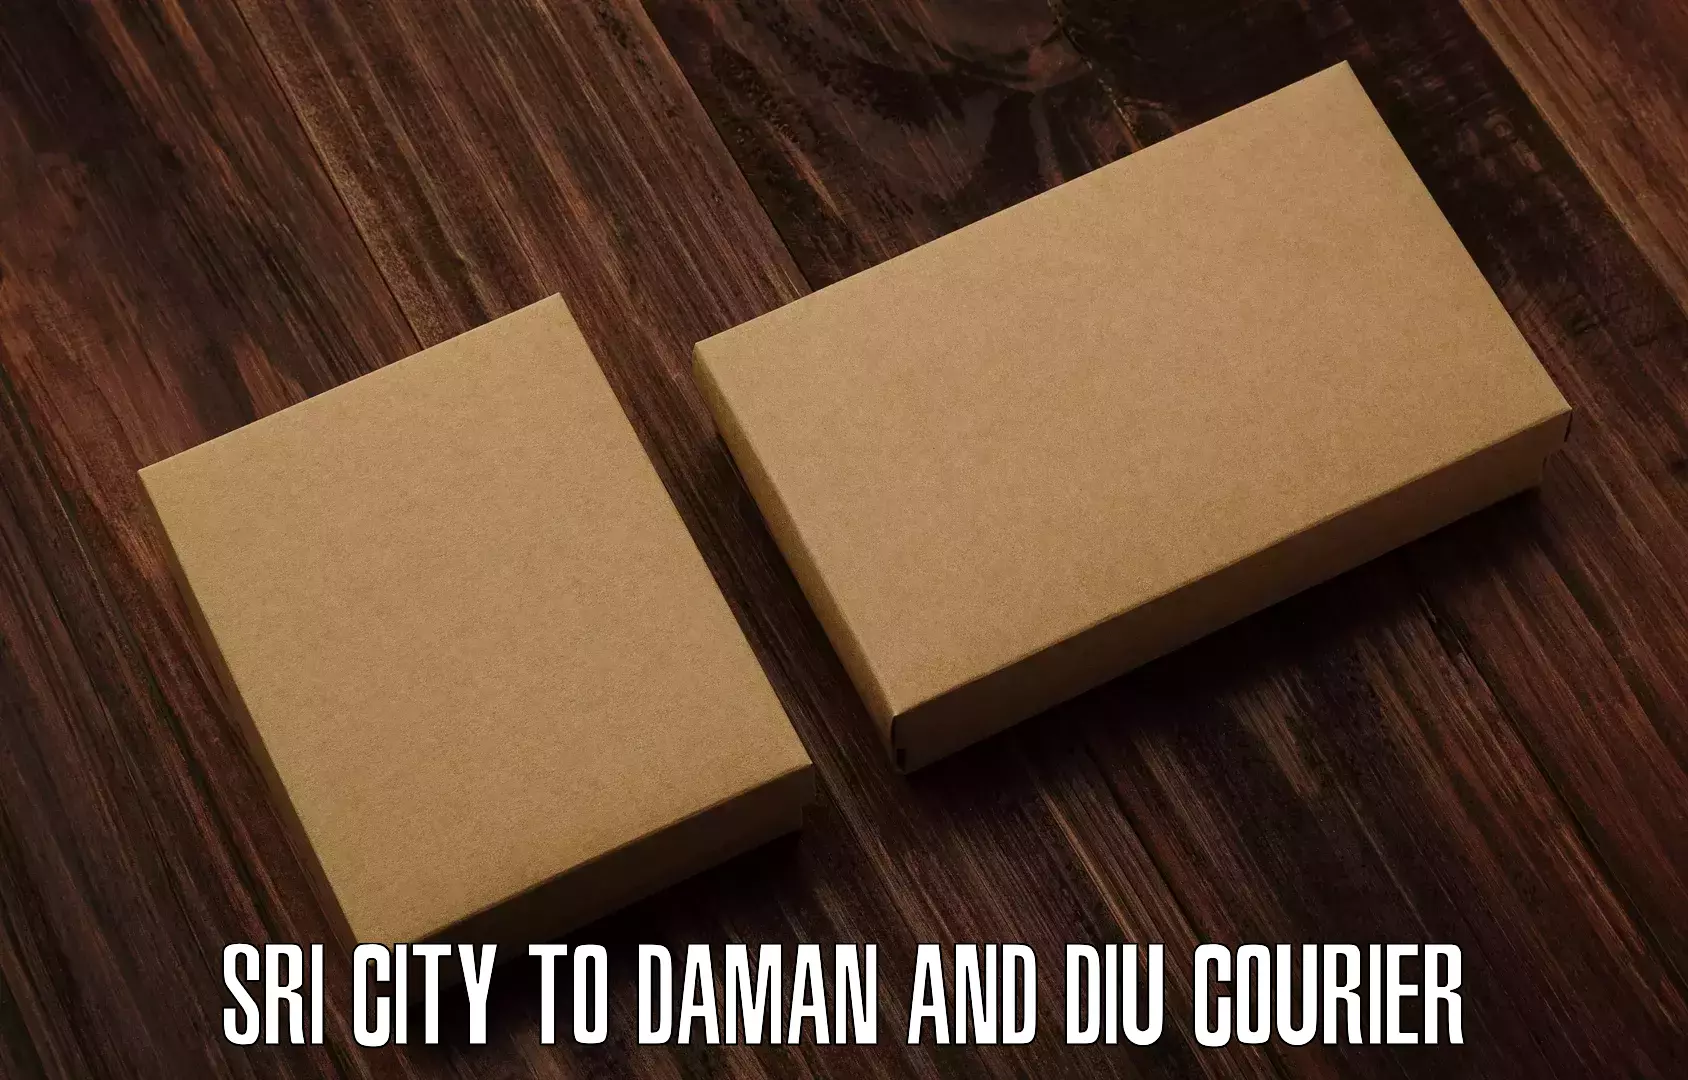 Express package transport Sri City to Diu